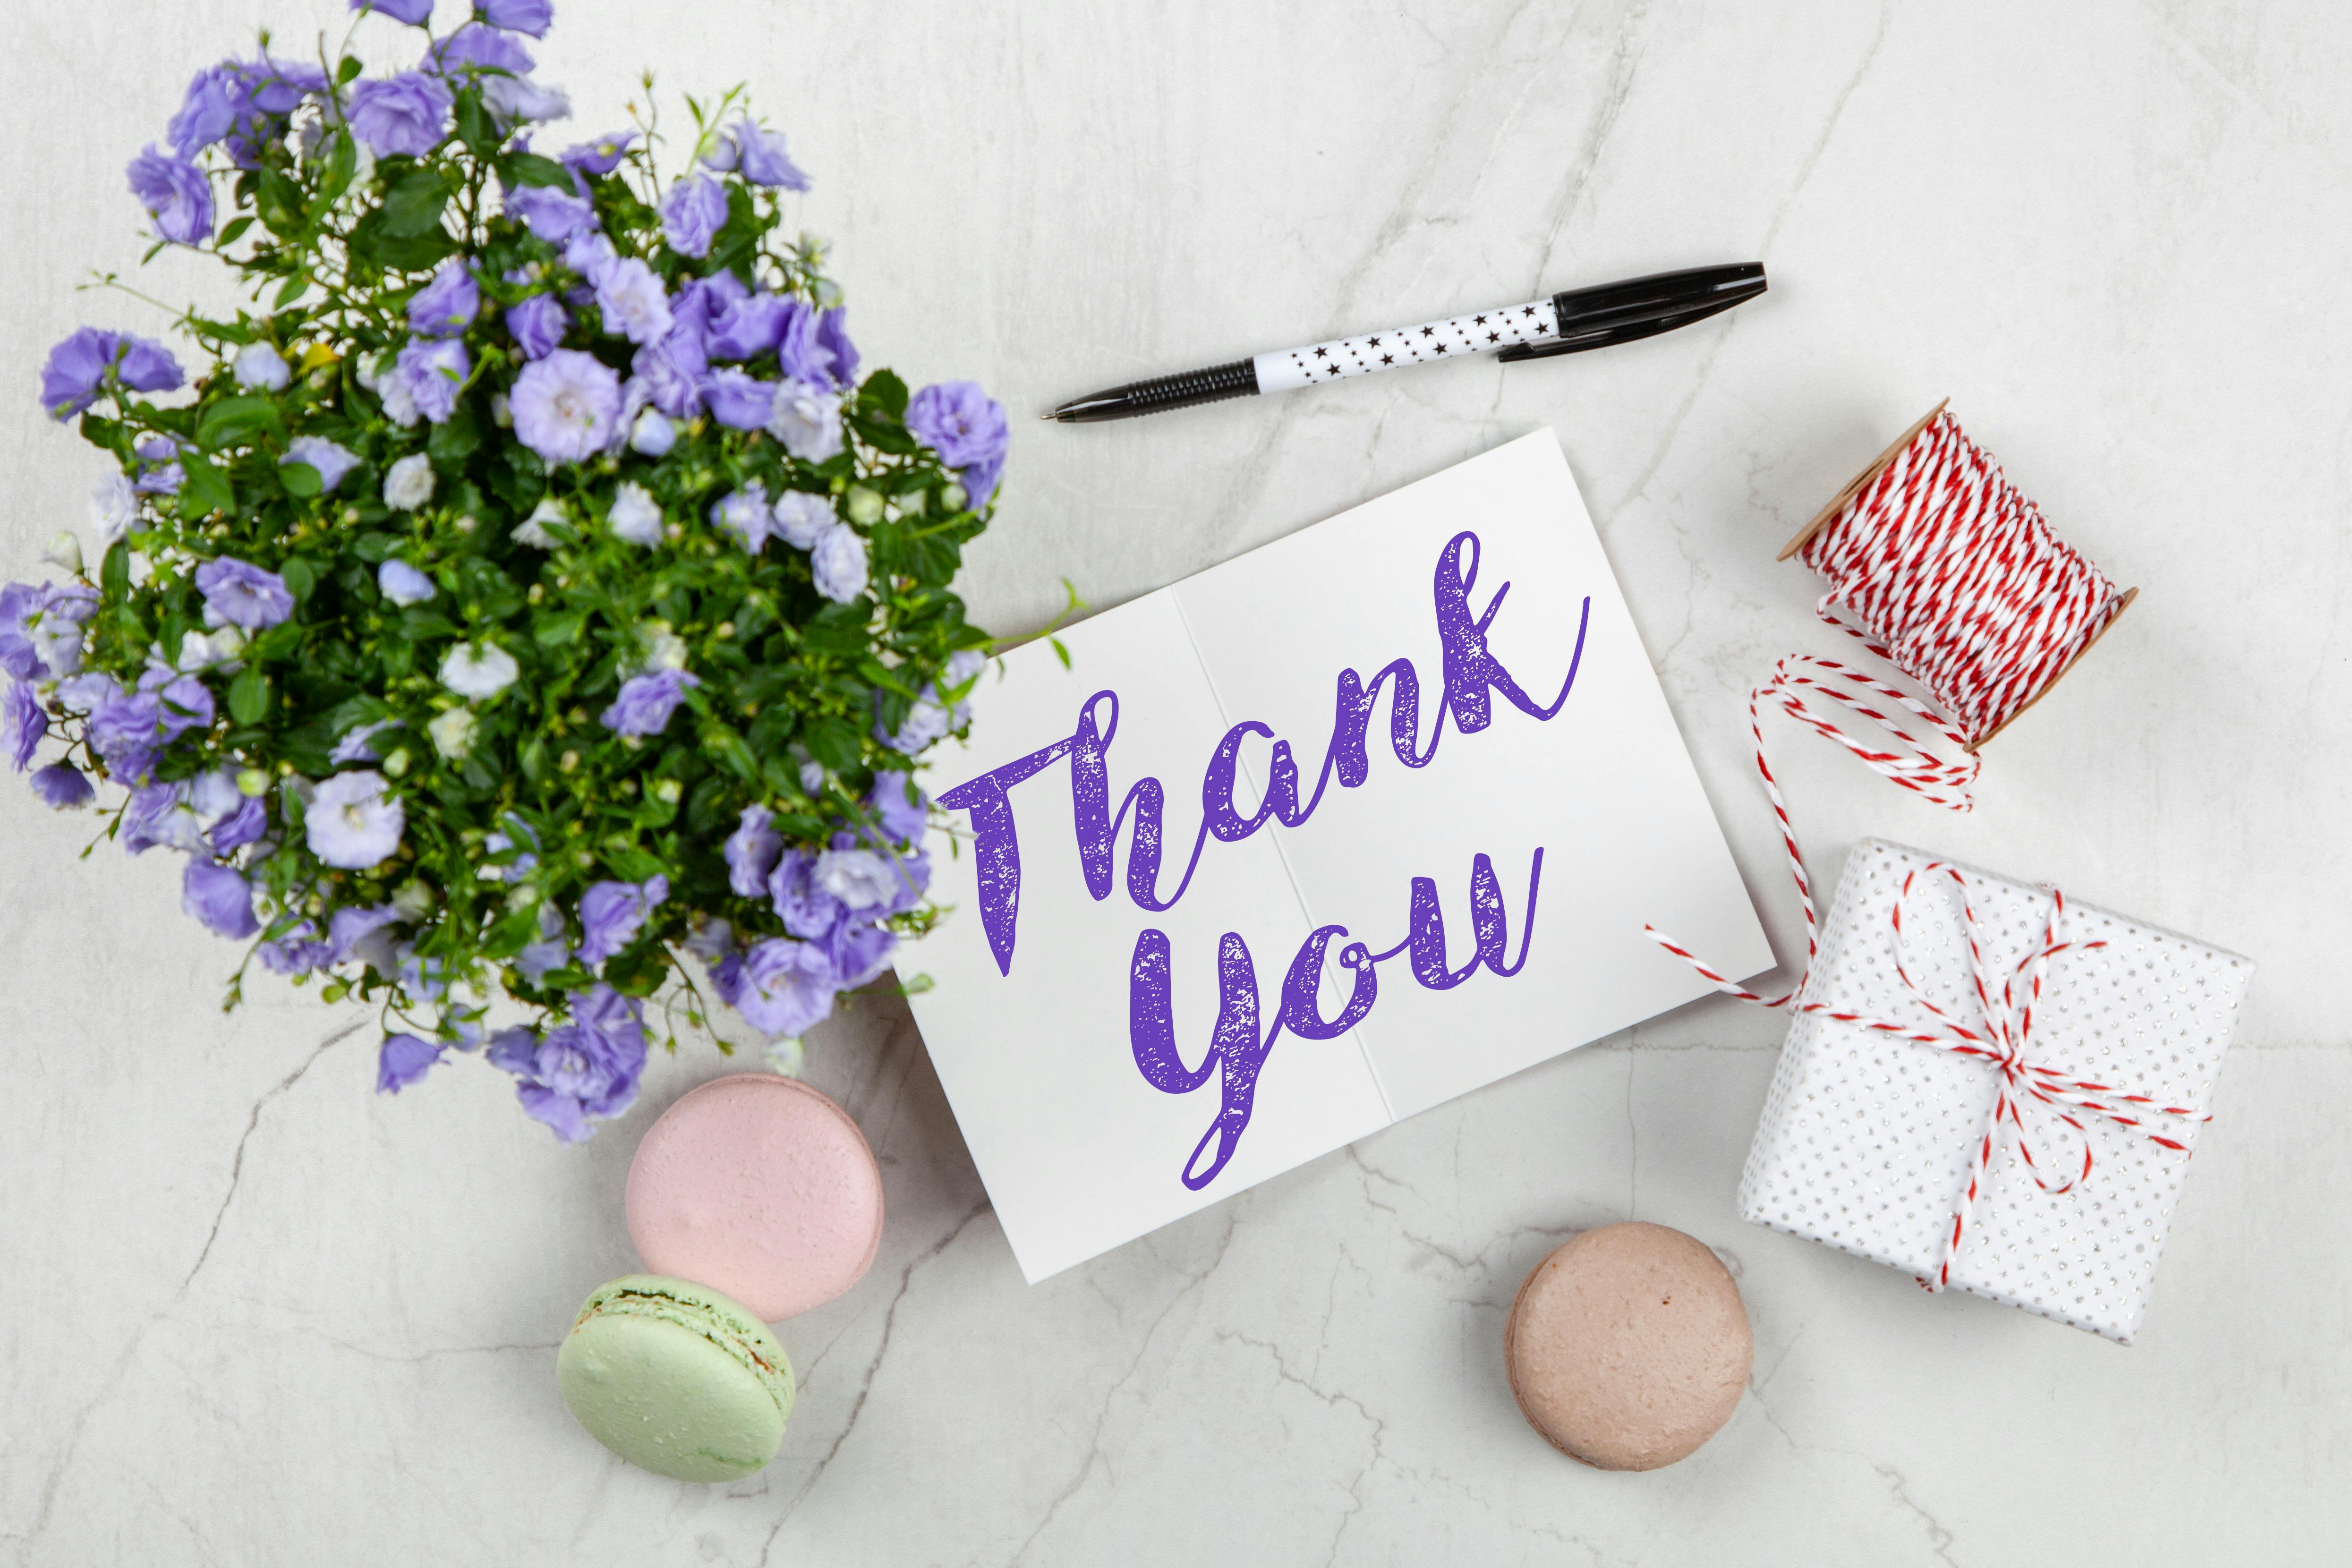 1,000+ Best Thank You Images · 100% Free Download · Pexels Stock Photos